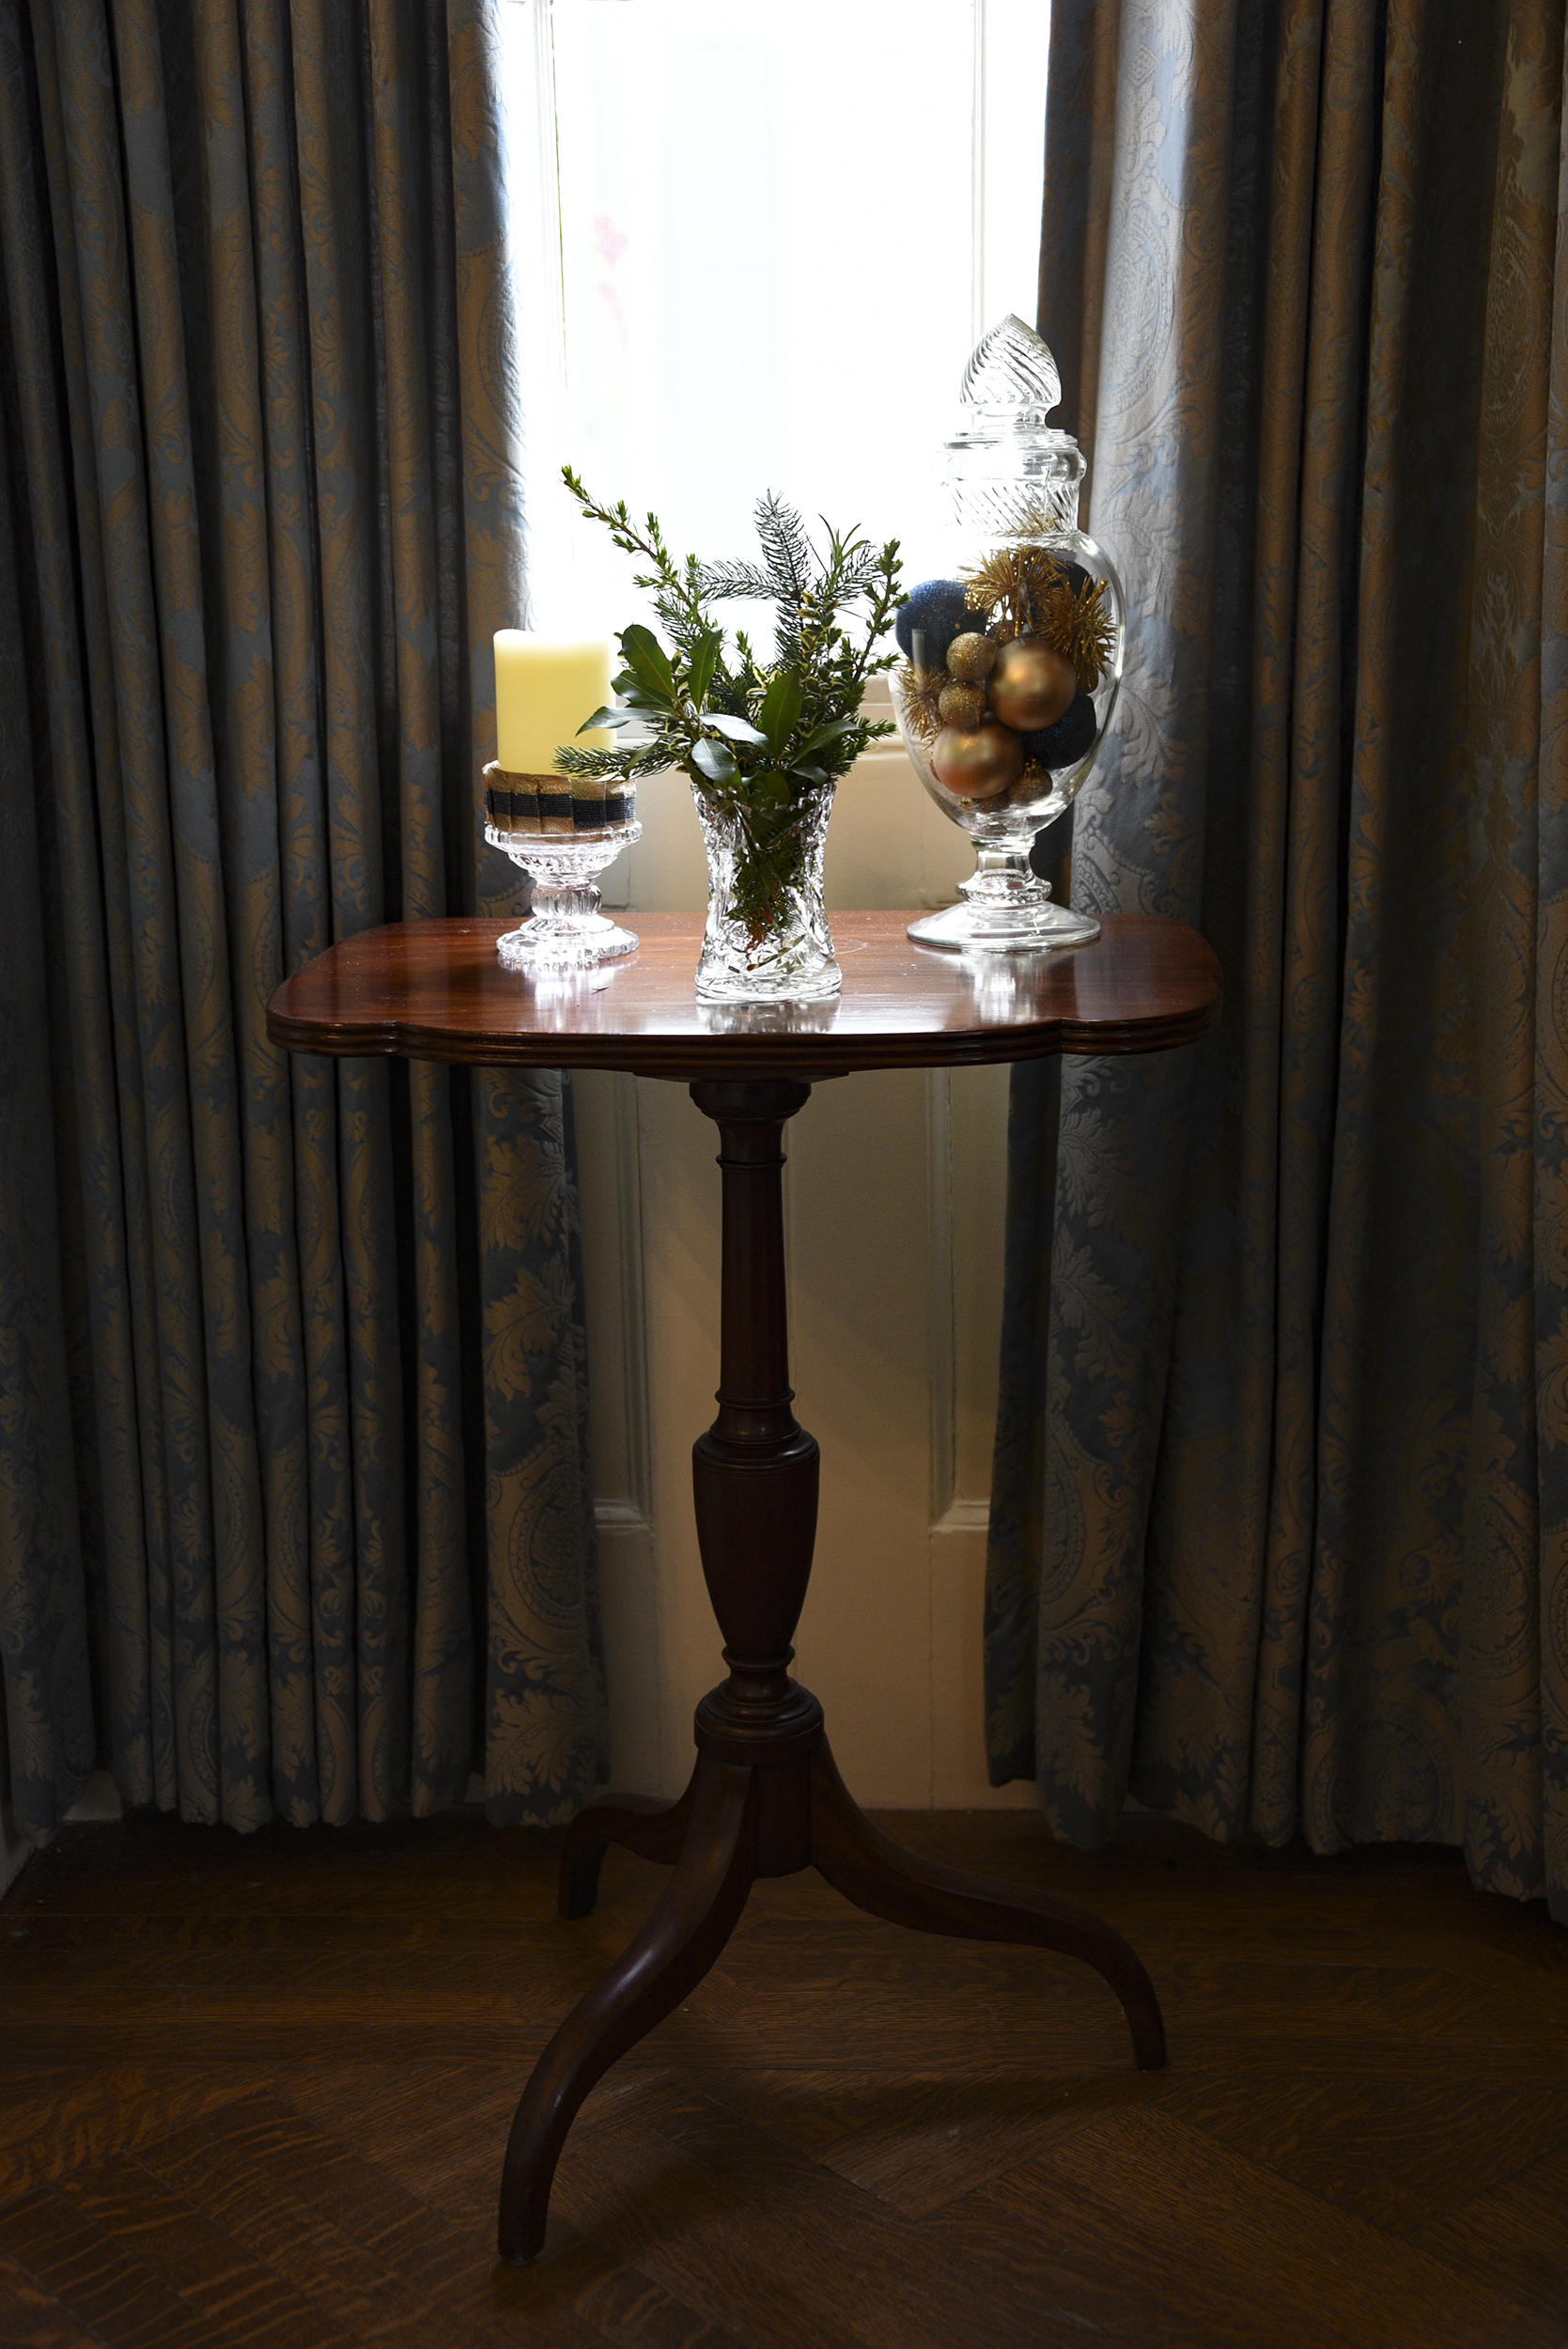 A side table in a Parlor window shines with gold and greens and glass decor.